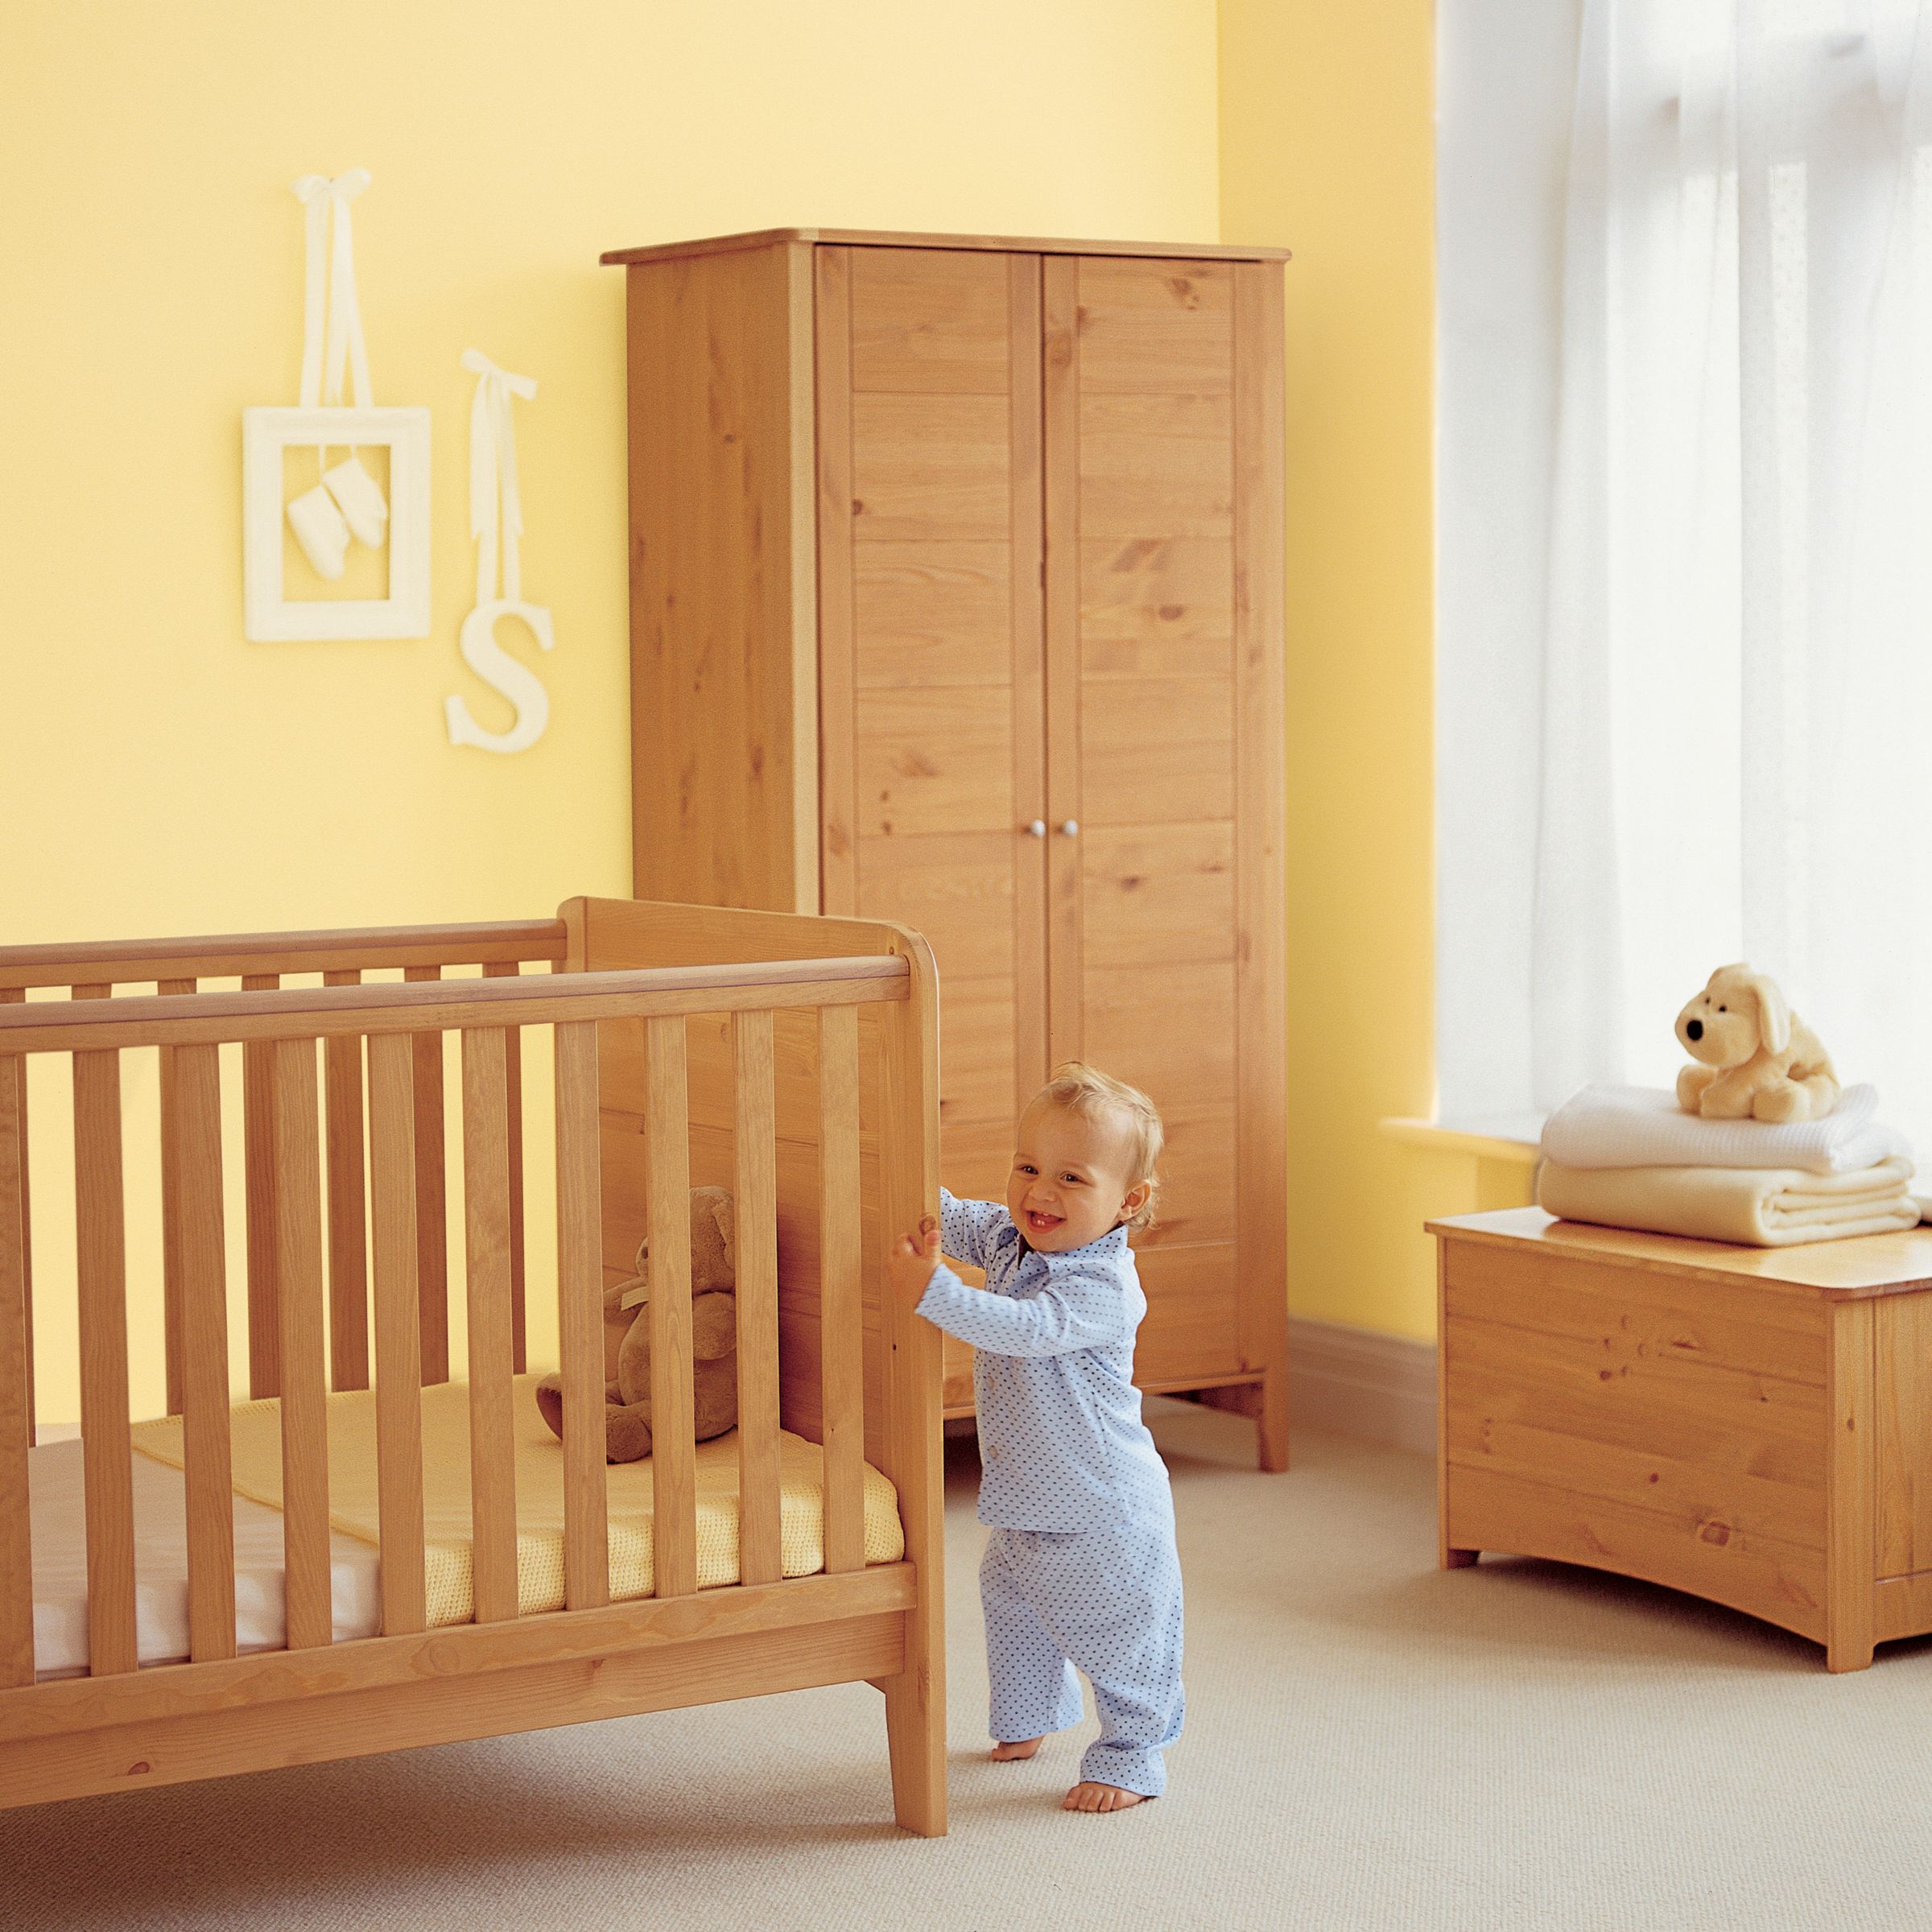 Nursery Sets Furniture on Baby Nursery Furniture Set That Your Baby Will Feel Comfortable